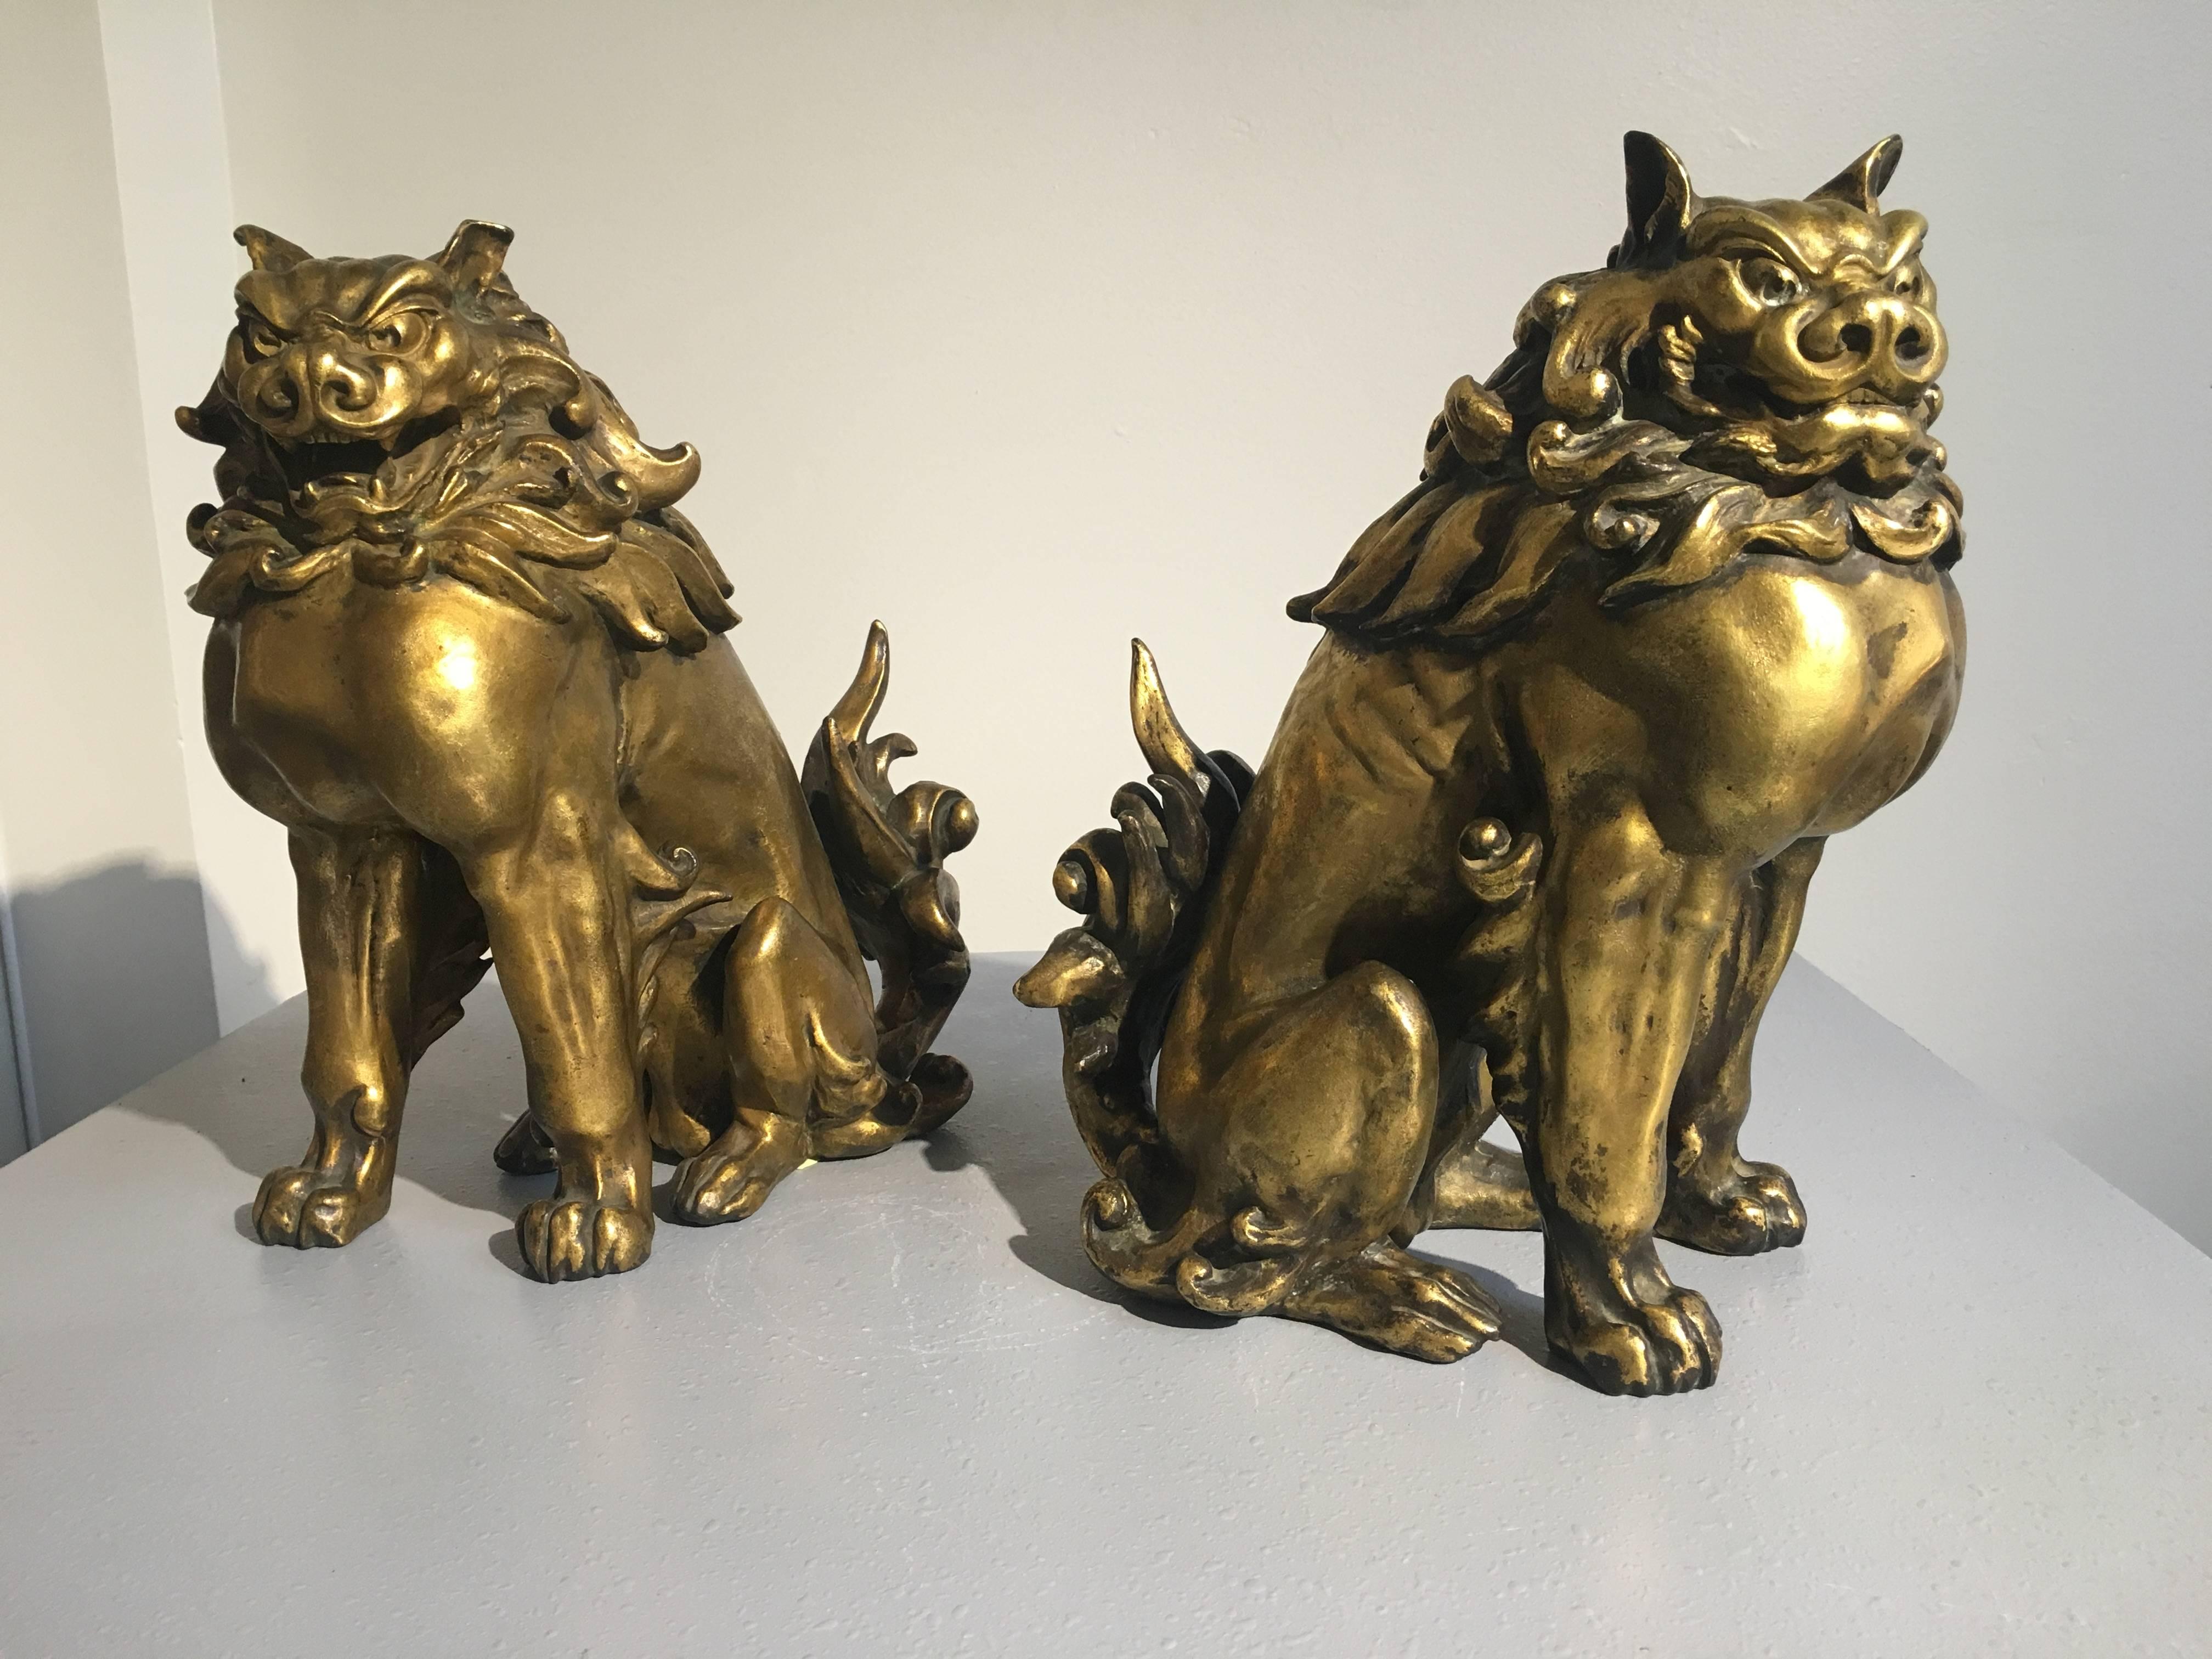 A striking pair of Japanese gilt bronze komainu by the renowned Japanese sculptor, Ishikawa Komei (1852-1913), Meiji period, Japan.

The pair well cast, and robustly modeled. They are portrayed seated on their haunches, with broad, muscular chests,